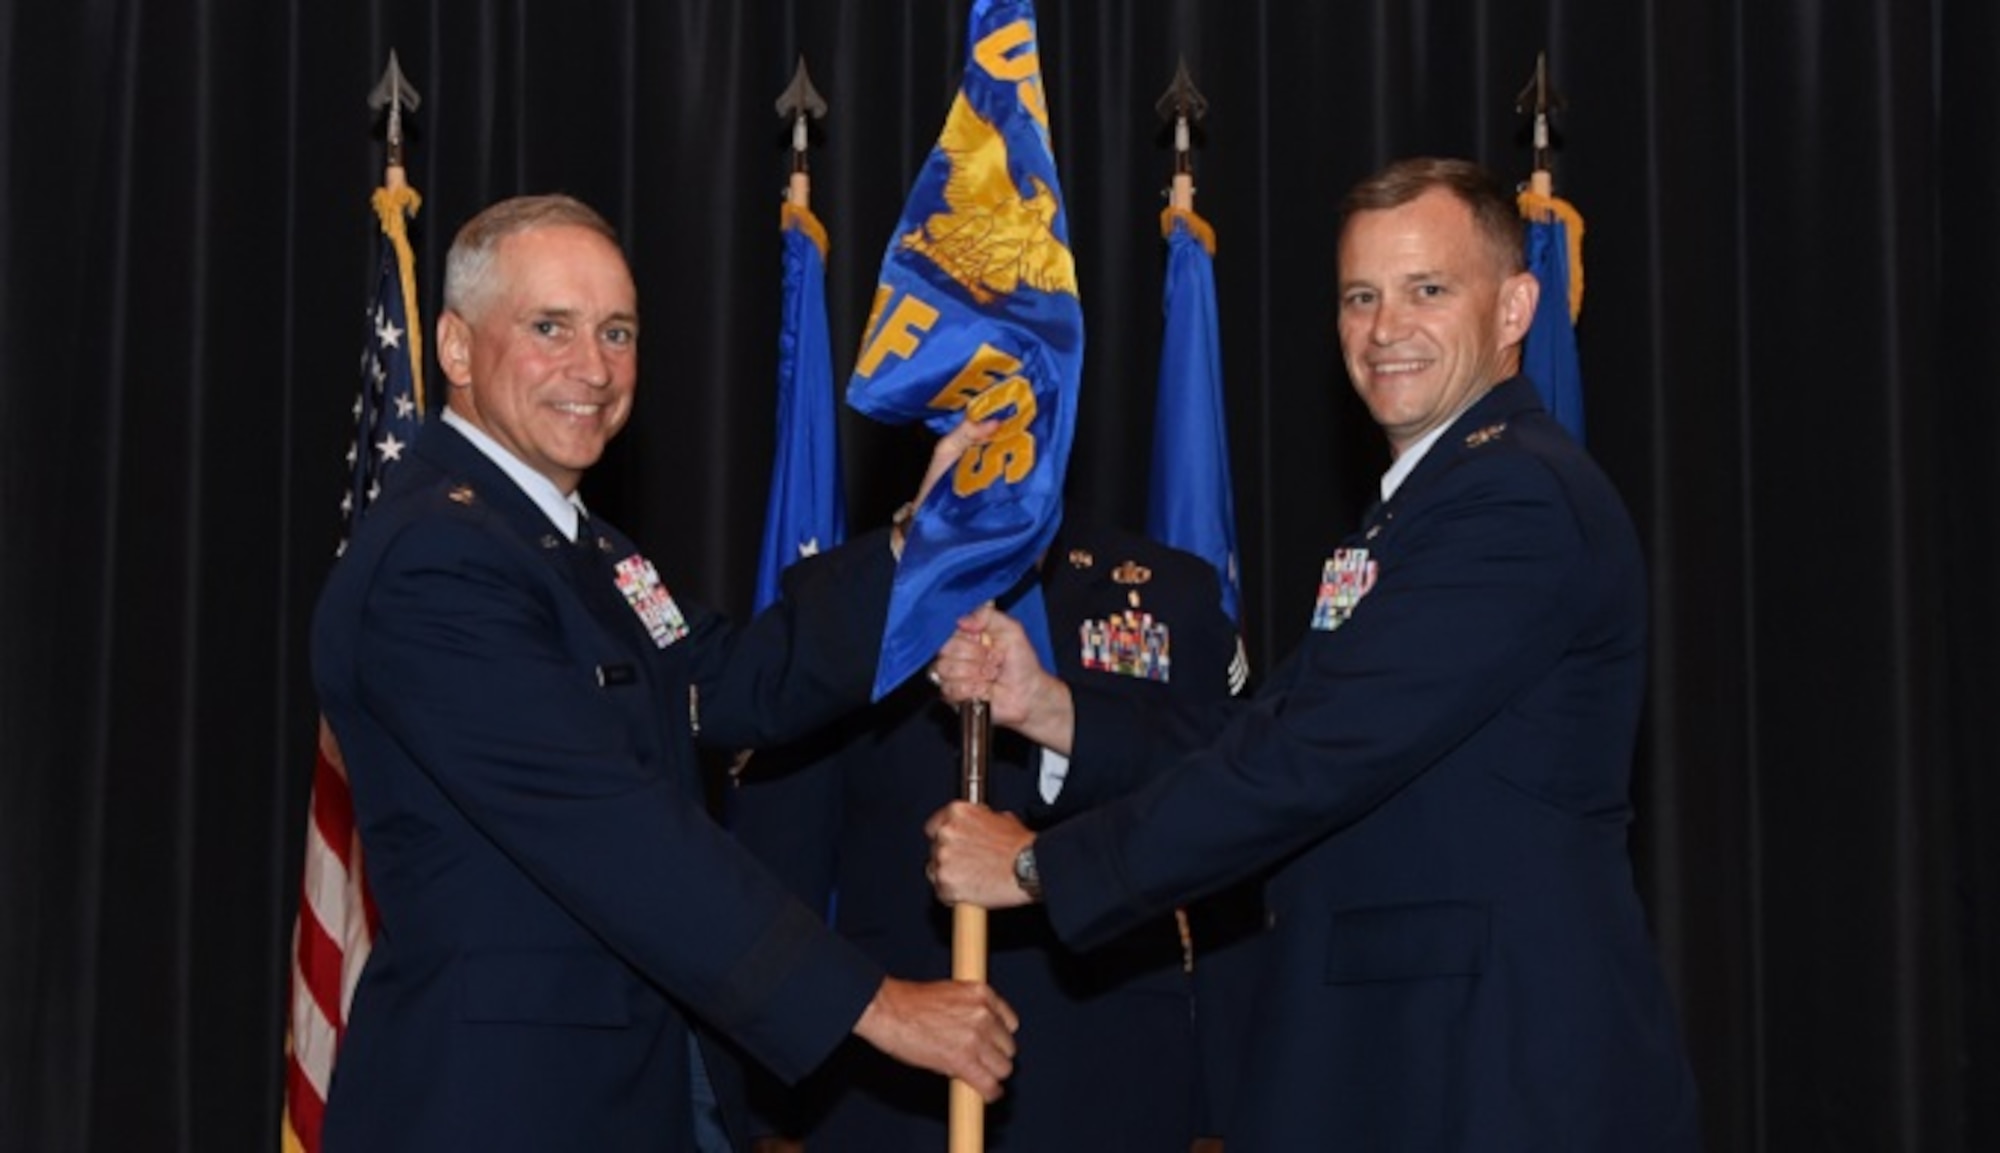 Col. Thomas J. O'Connell, Jr. (right), assumes command of the U.S. Air Force Expeditionary Operations School in a change-of-command ceremony at Joint Base McGuire-Dix-Lakehurst, N.J., July 7. Maj. Gen. Frederick Martin, U.S. Air Force Expeditionary Center commander, presided over the ceremony. Prior to taking command of the school, O'Connell served as the Chief of East and Southeast Contingency Plans within Pacific Command's Strategy and Policy Directorate near Honolulu, Hawaii. (U.S. Air Force photo by Tech. Sgt. Jaimie Powell)
